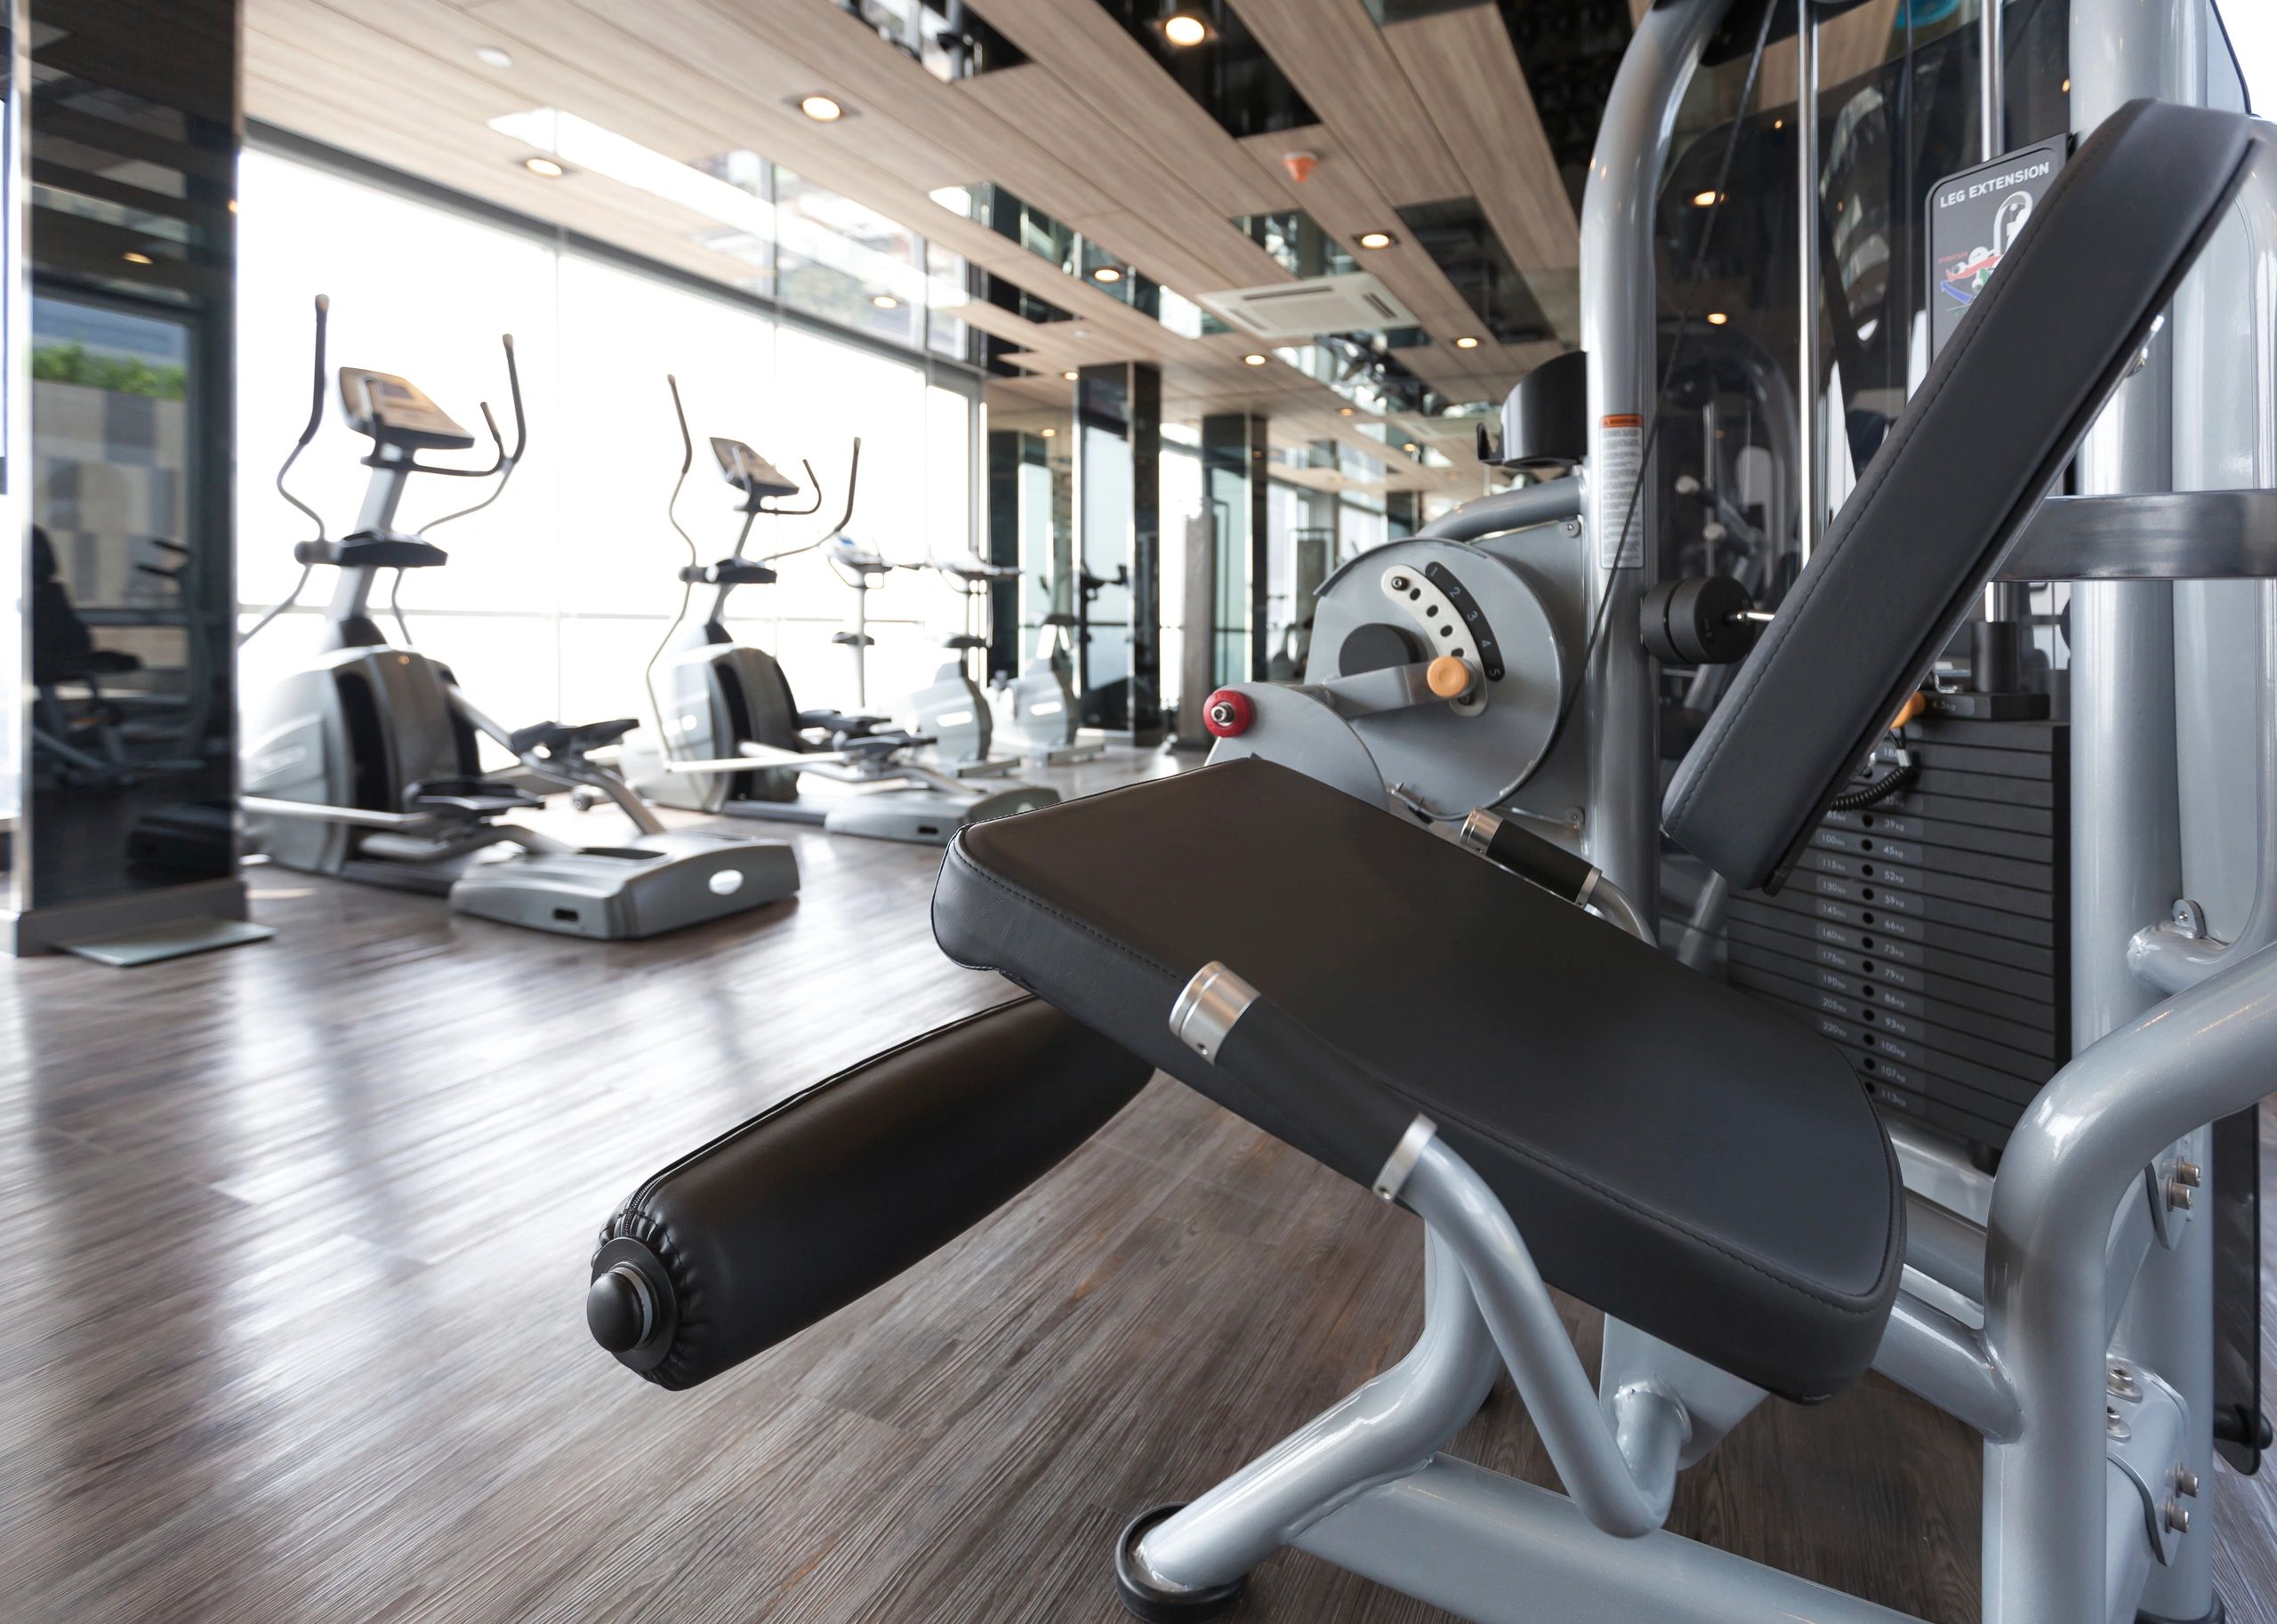 Comfortable Rent to own gym equipment brisbane for Routine Workout